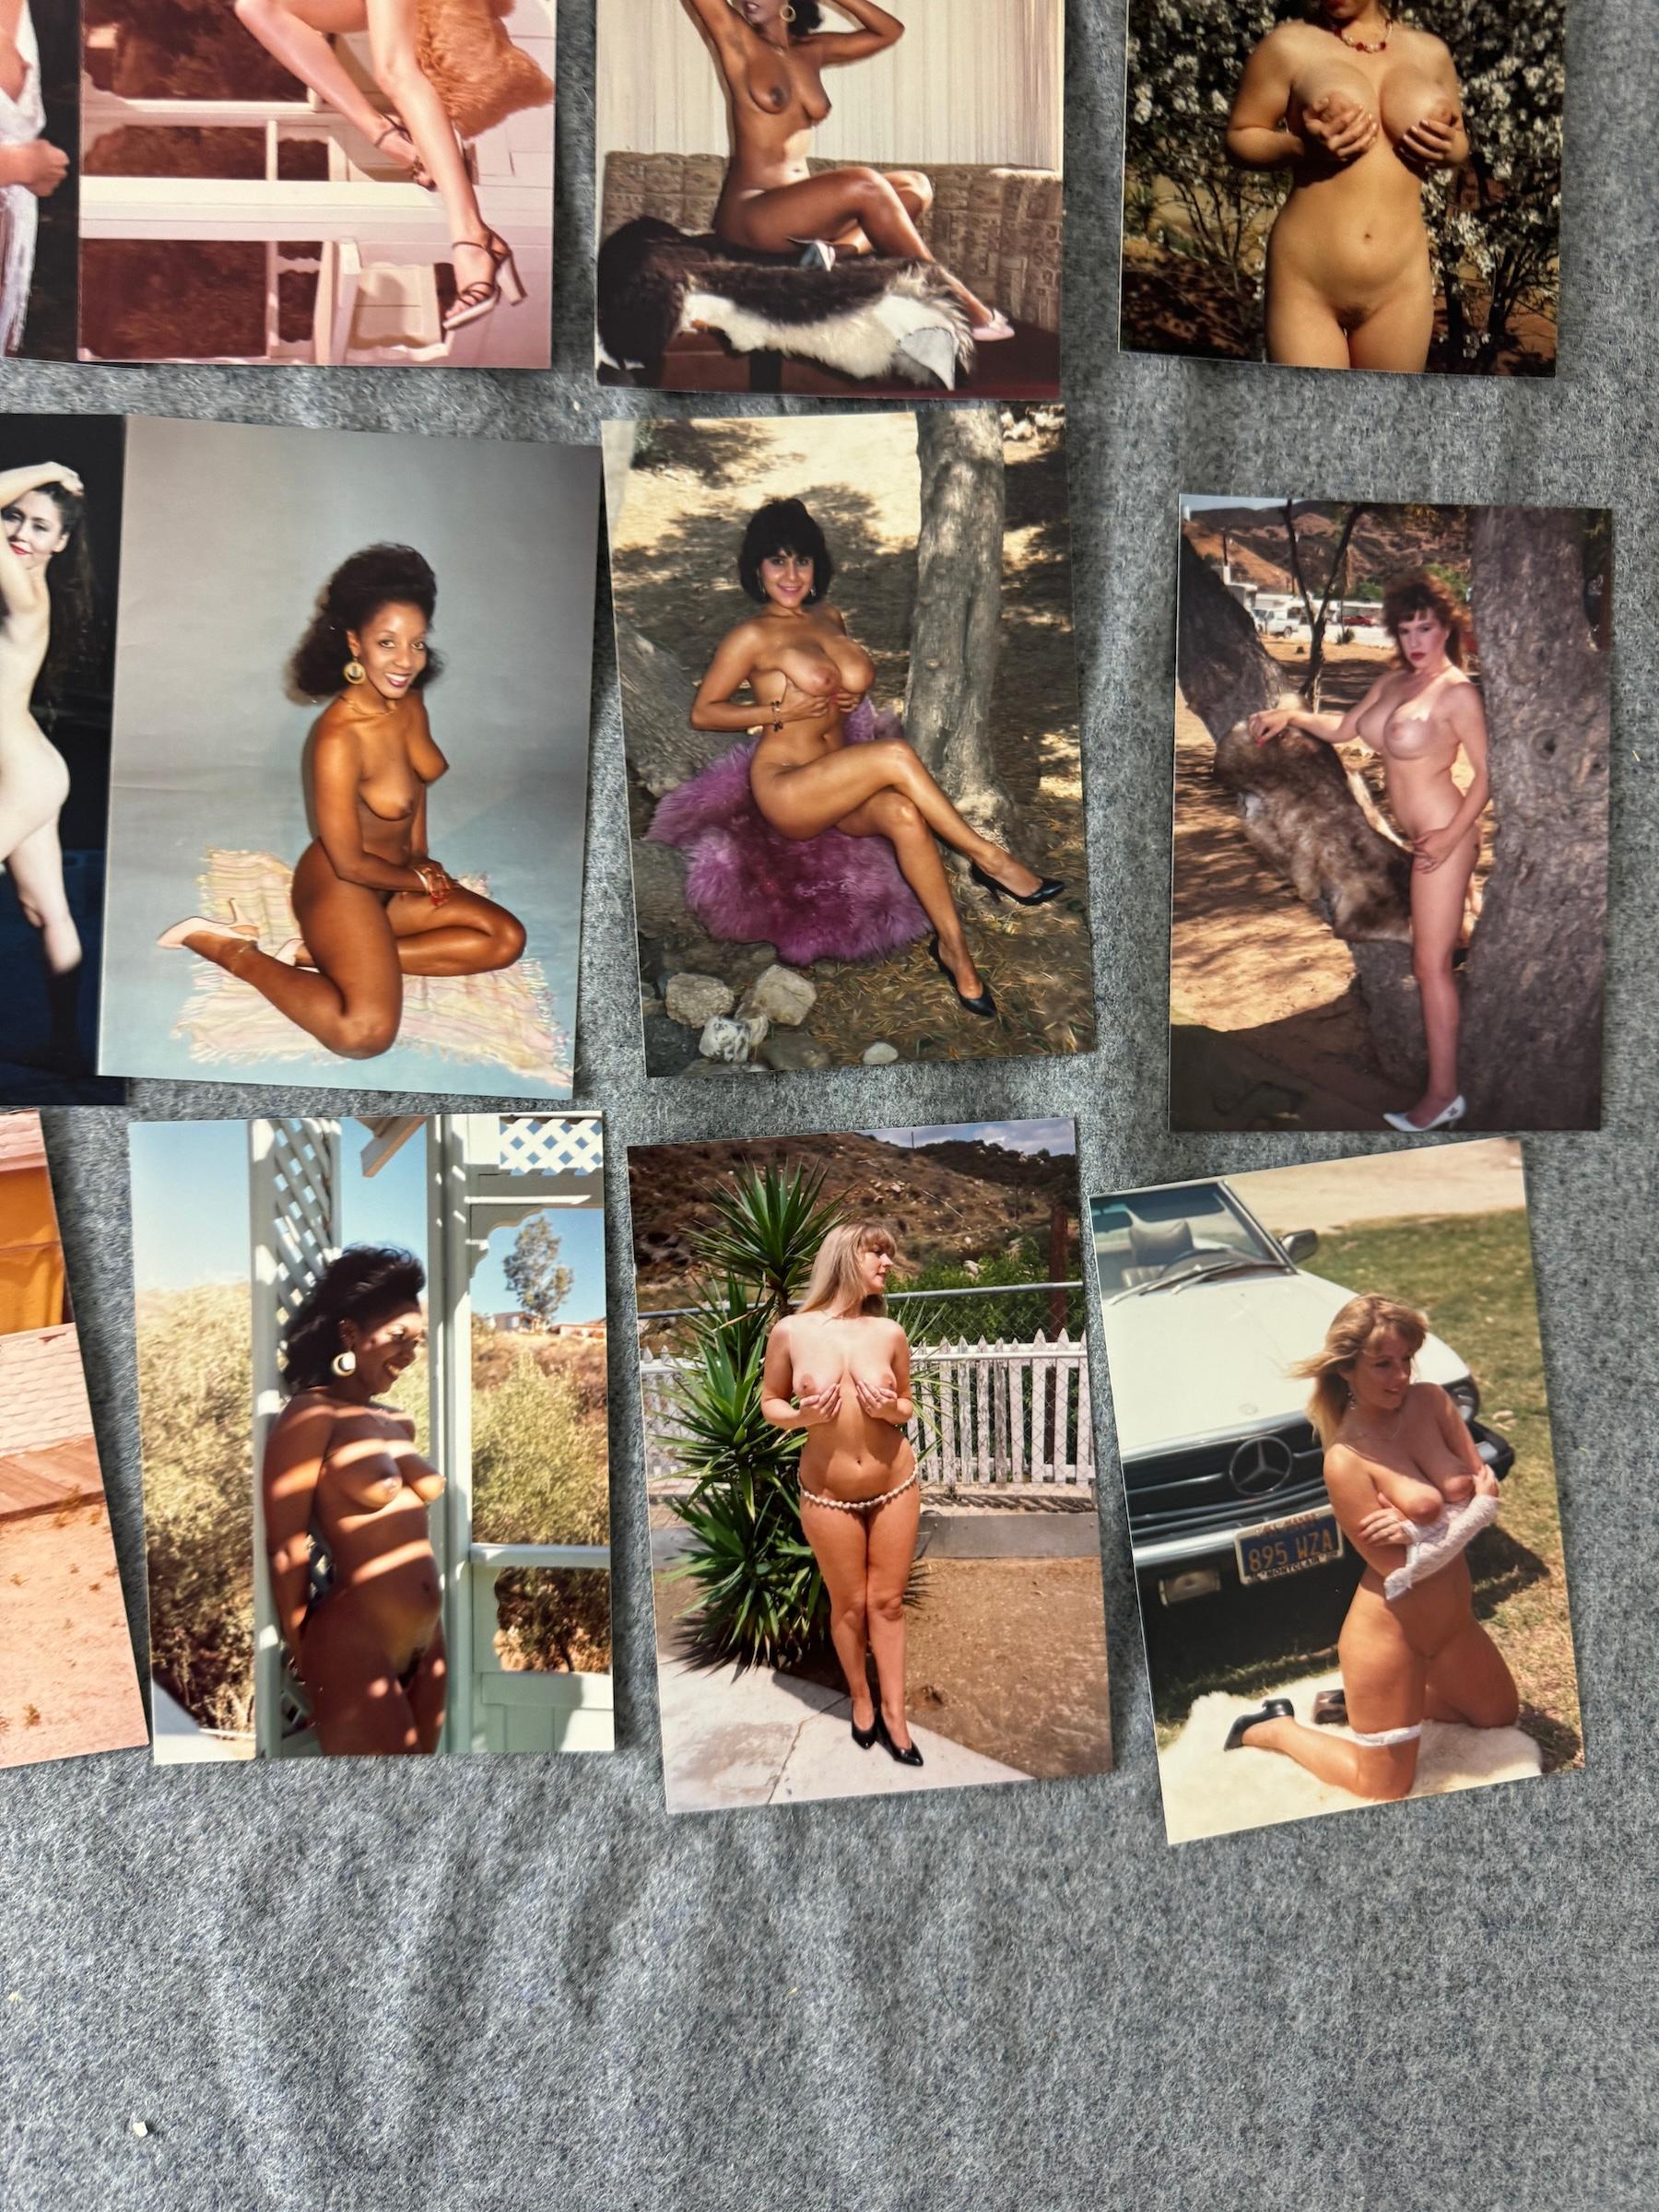 Vintage Pin-Up Nude Female Model Photograph KODAK Collection Lot